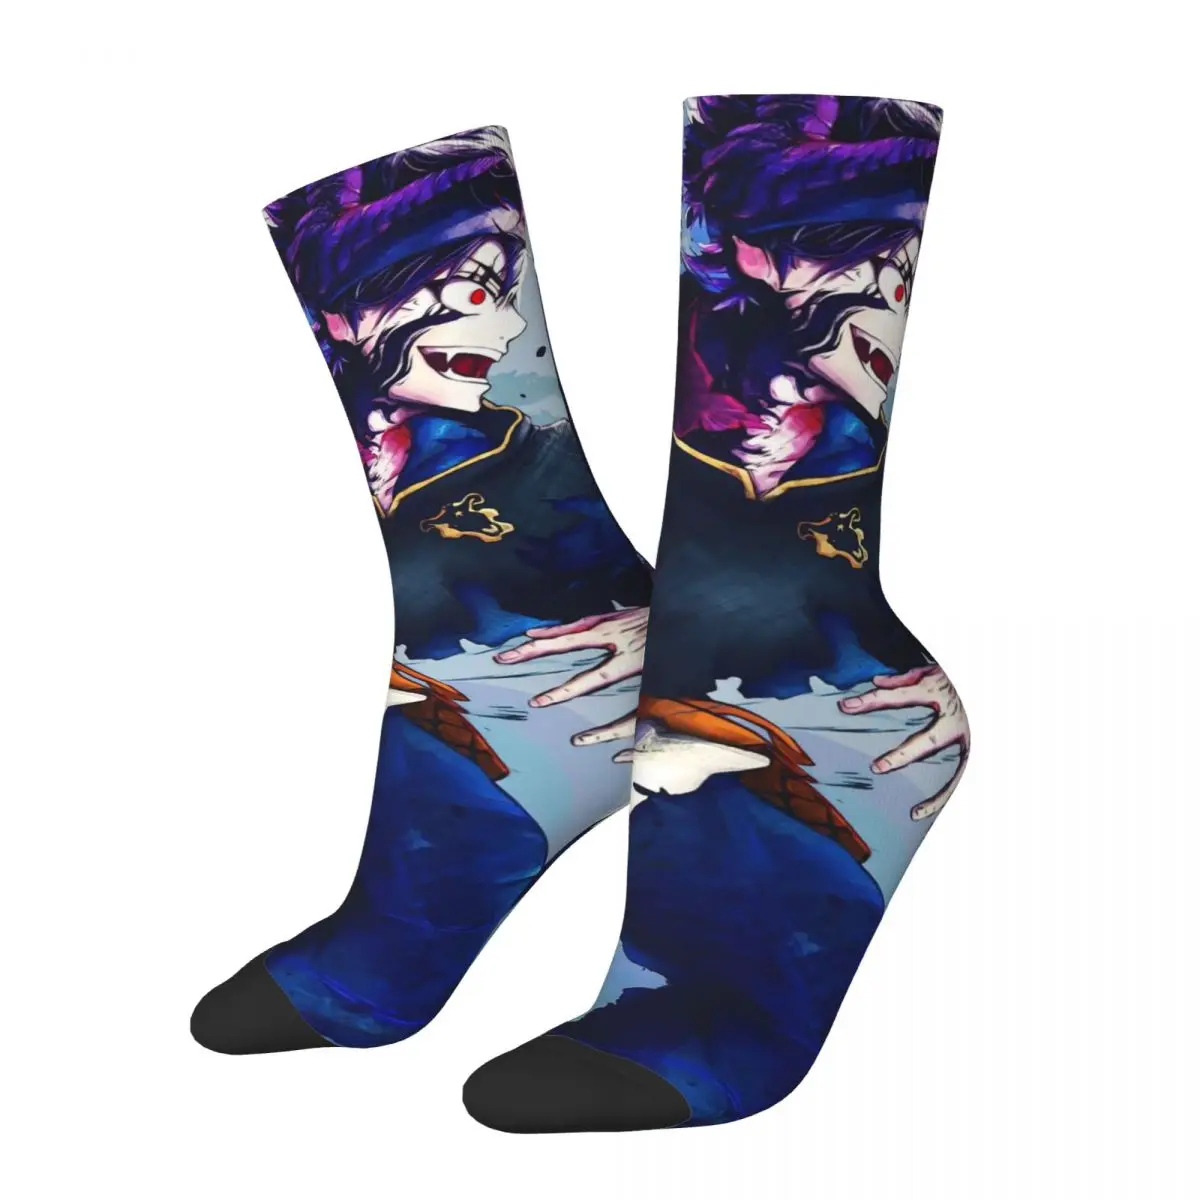 Funny Crazy Sock For Men The Man Hip Hop Vintage Black Clover Happy Quality Pattern Printed Boys Compression Sock Casual Gift